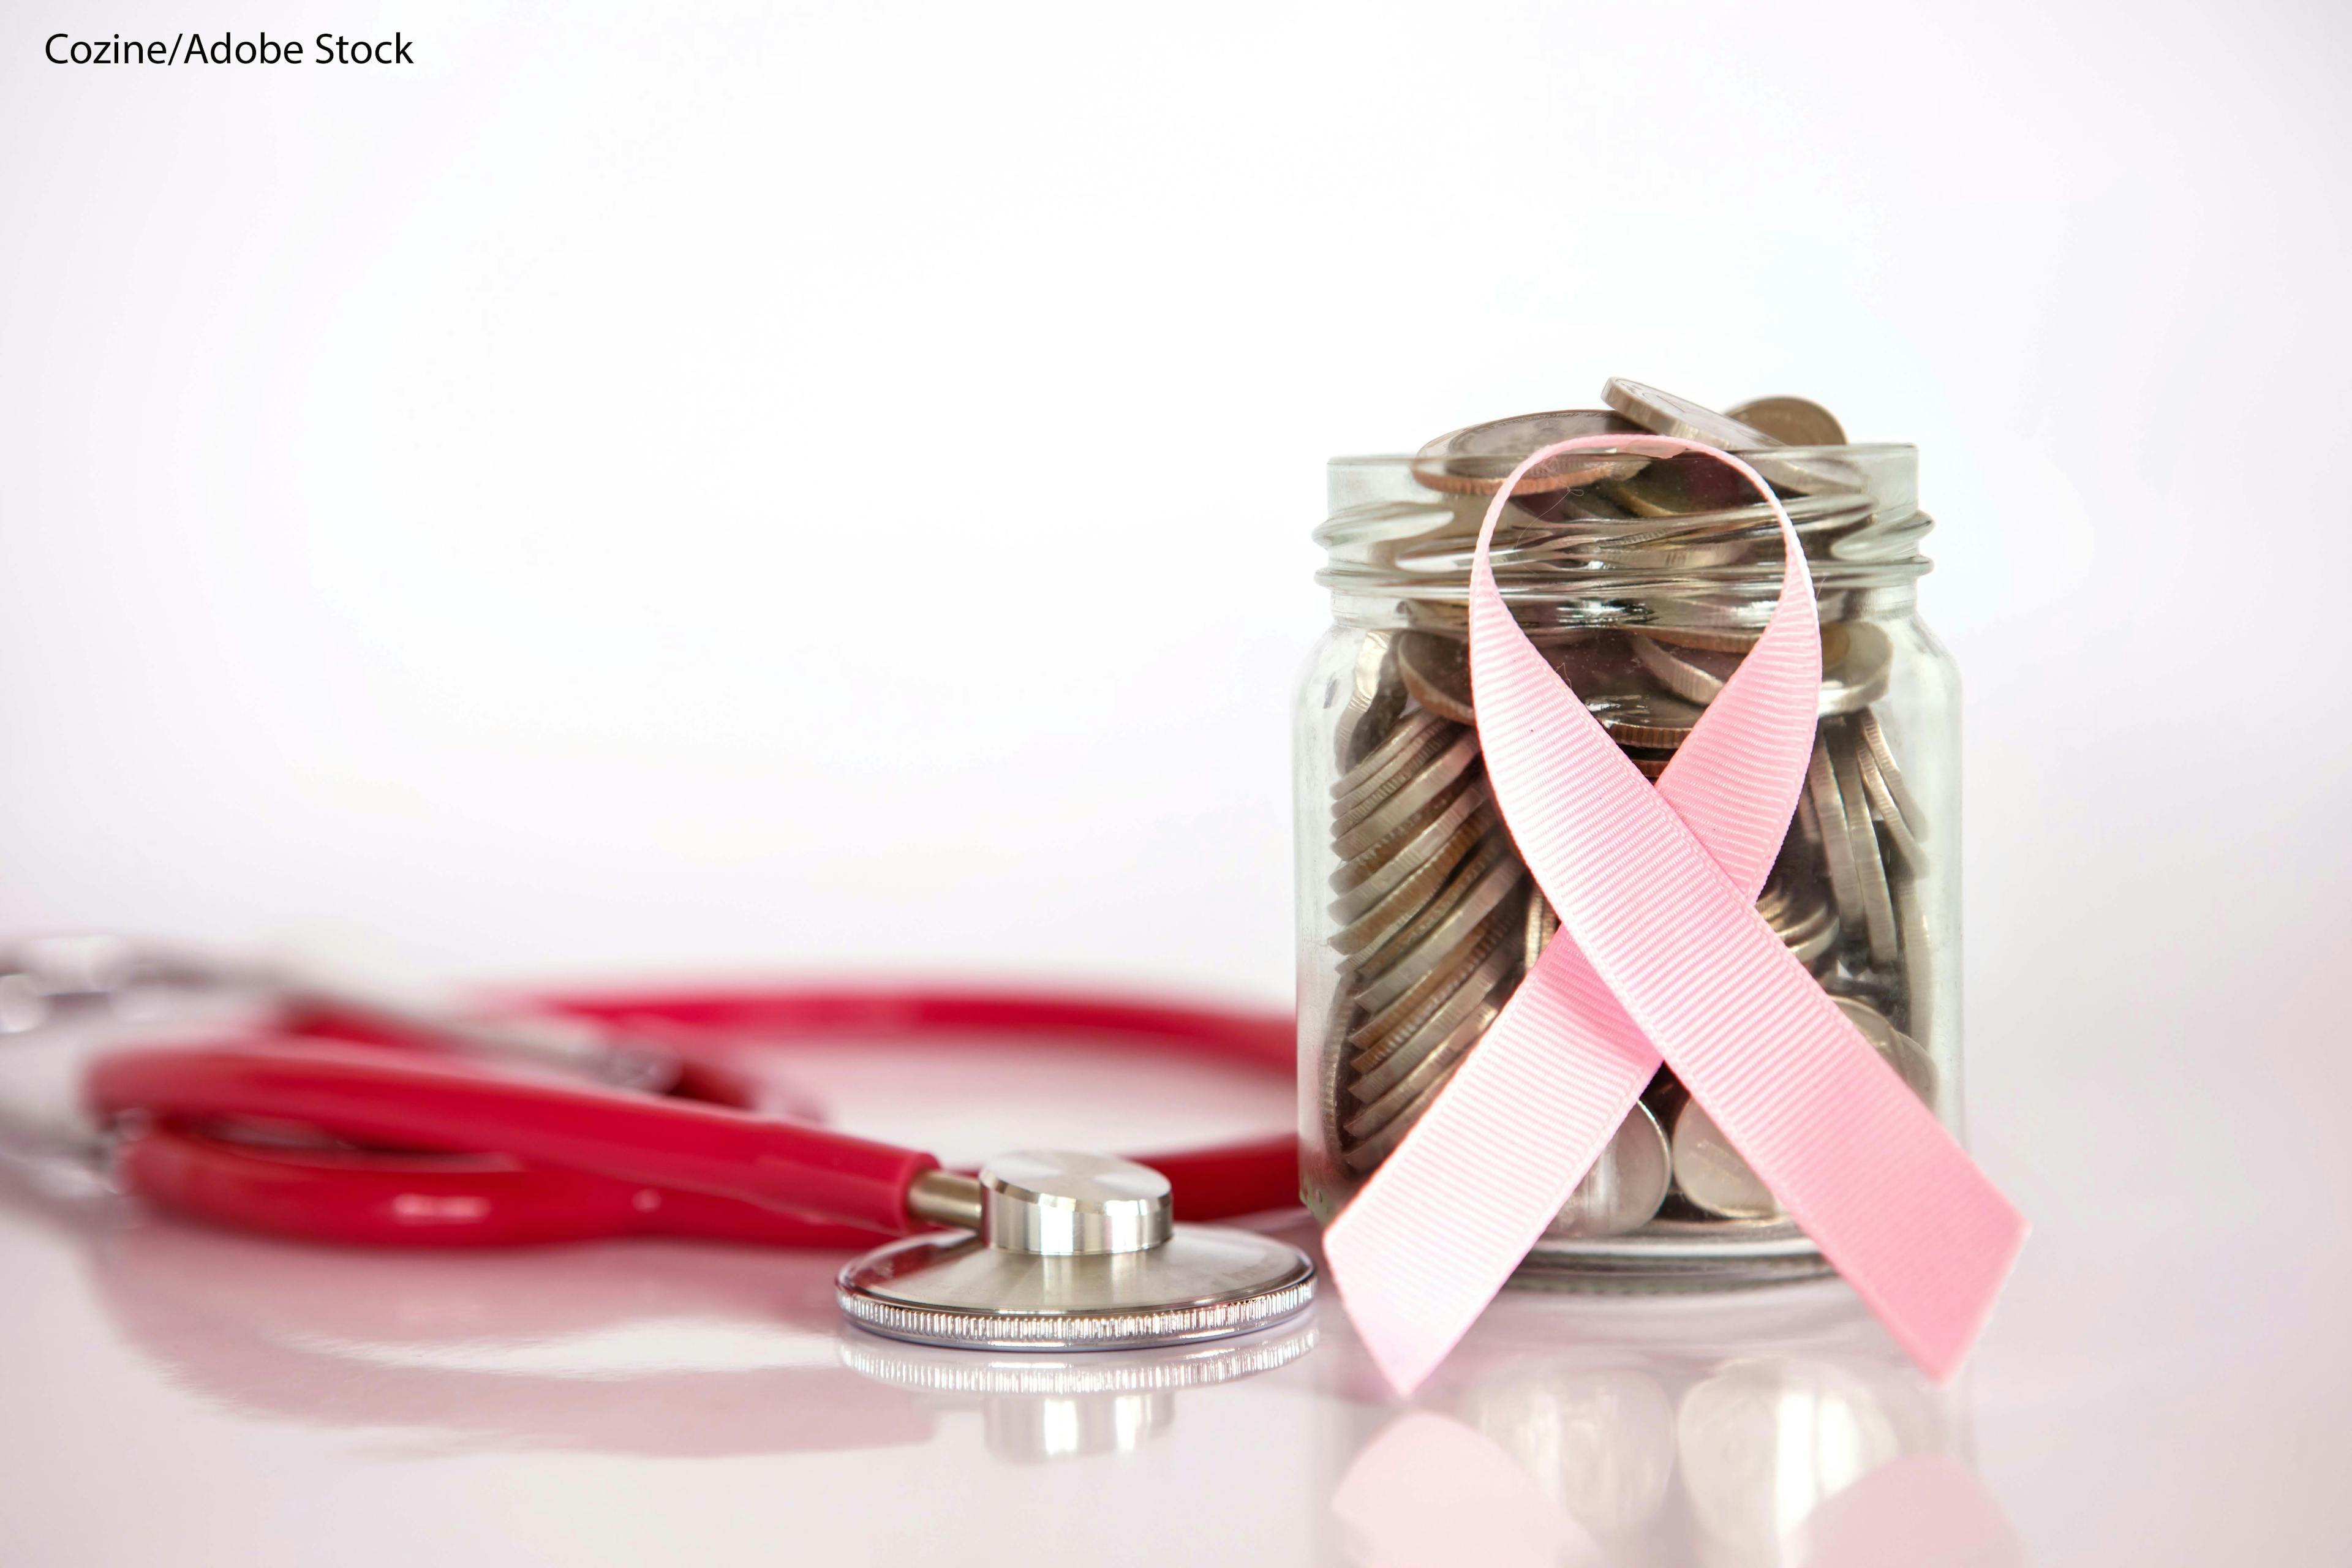 Young Women Diagnosed with Breast Cancer Likely to Experience Financial Decline